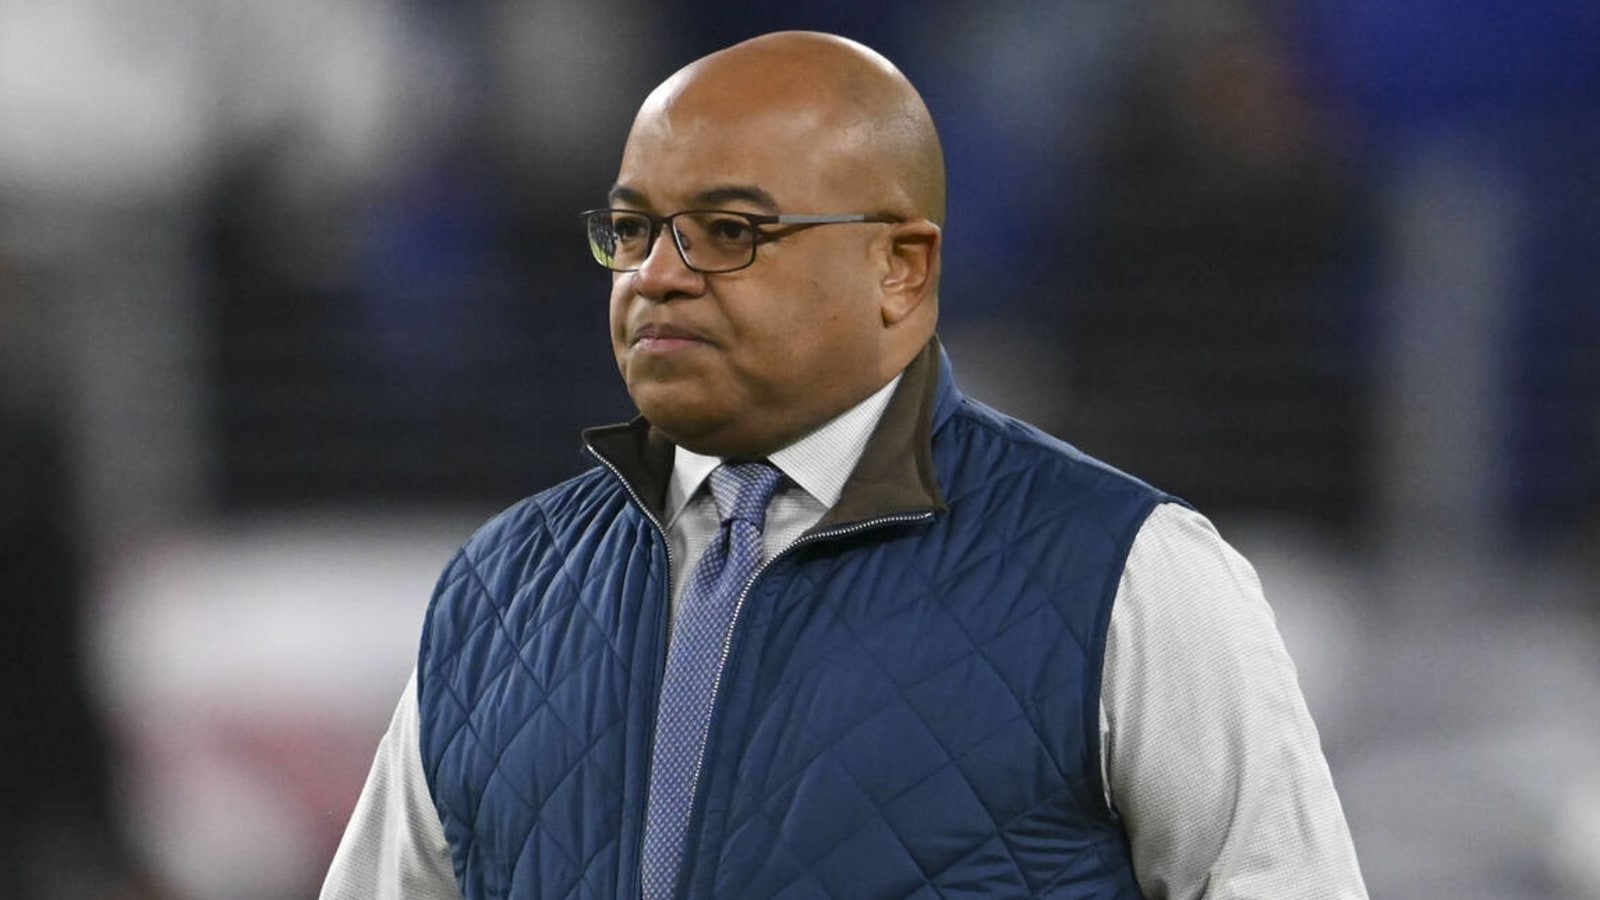 Mike Tirico to replace Al Michaels on 'Sunday Night Football'